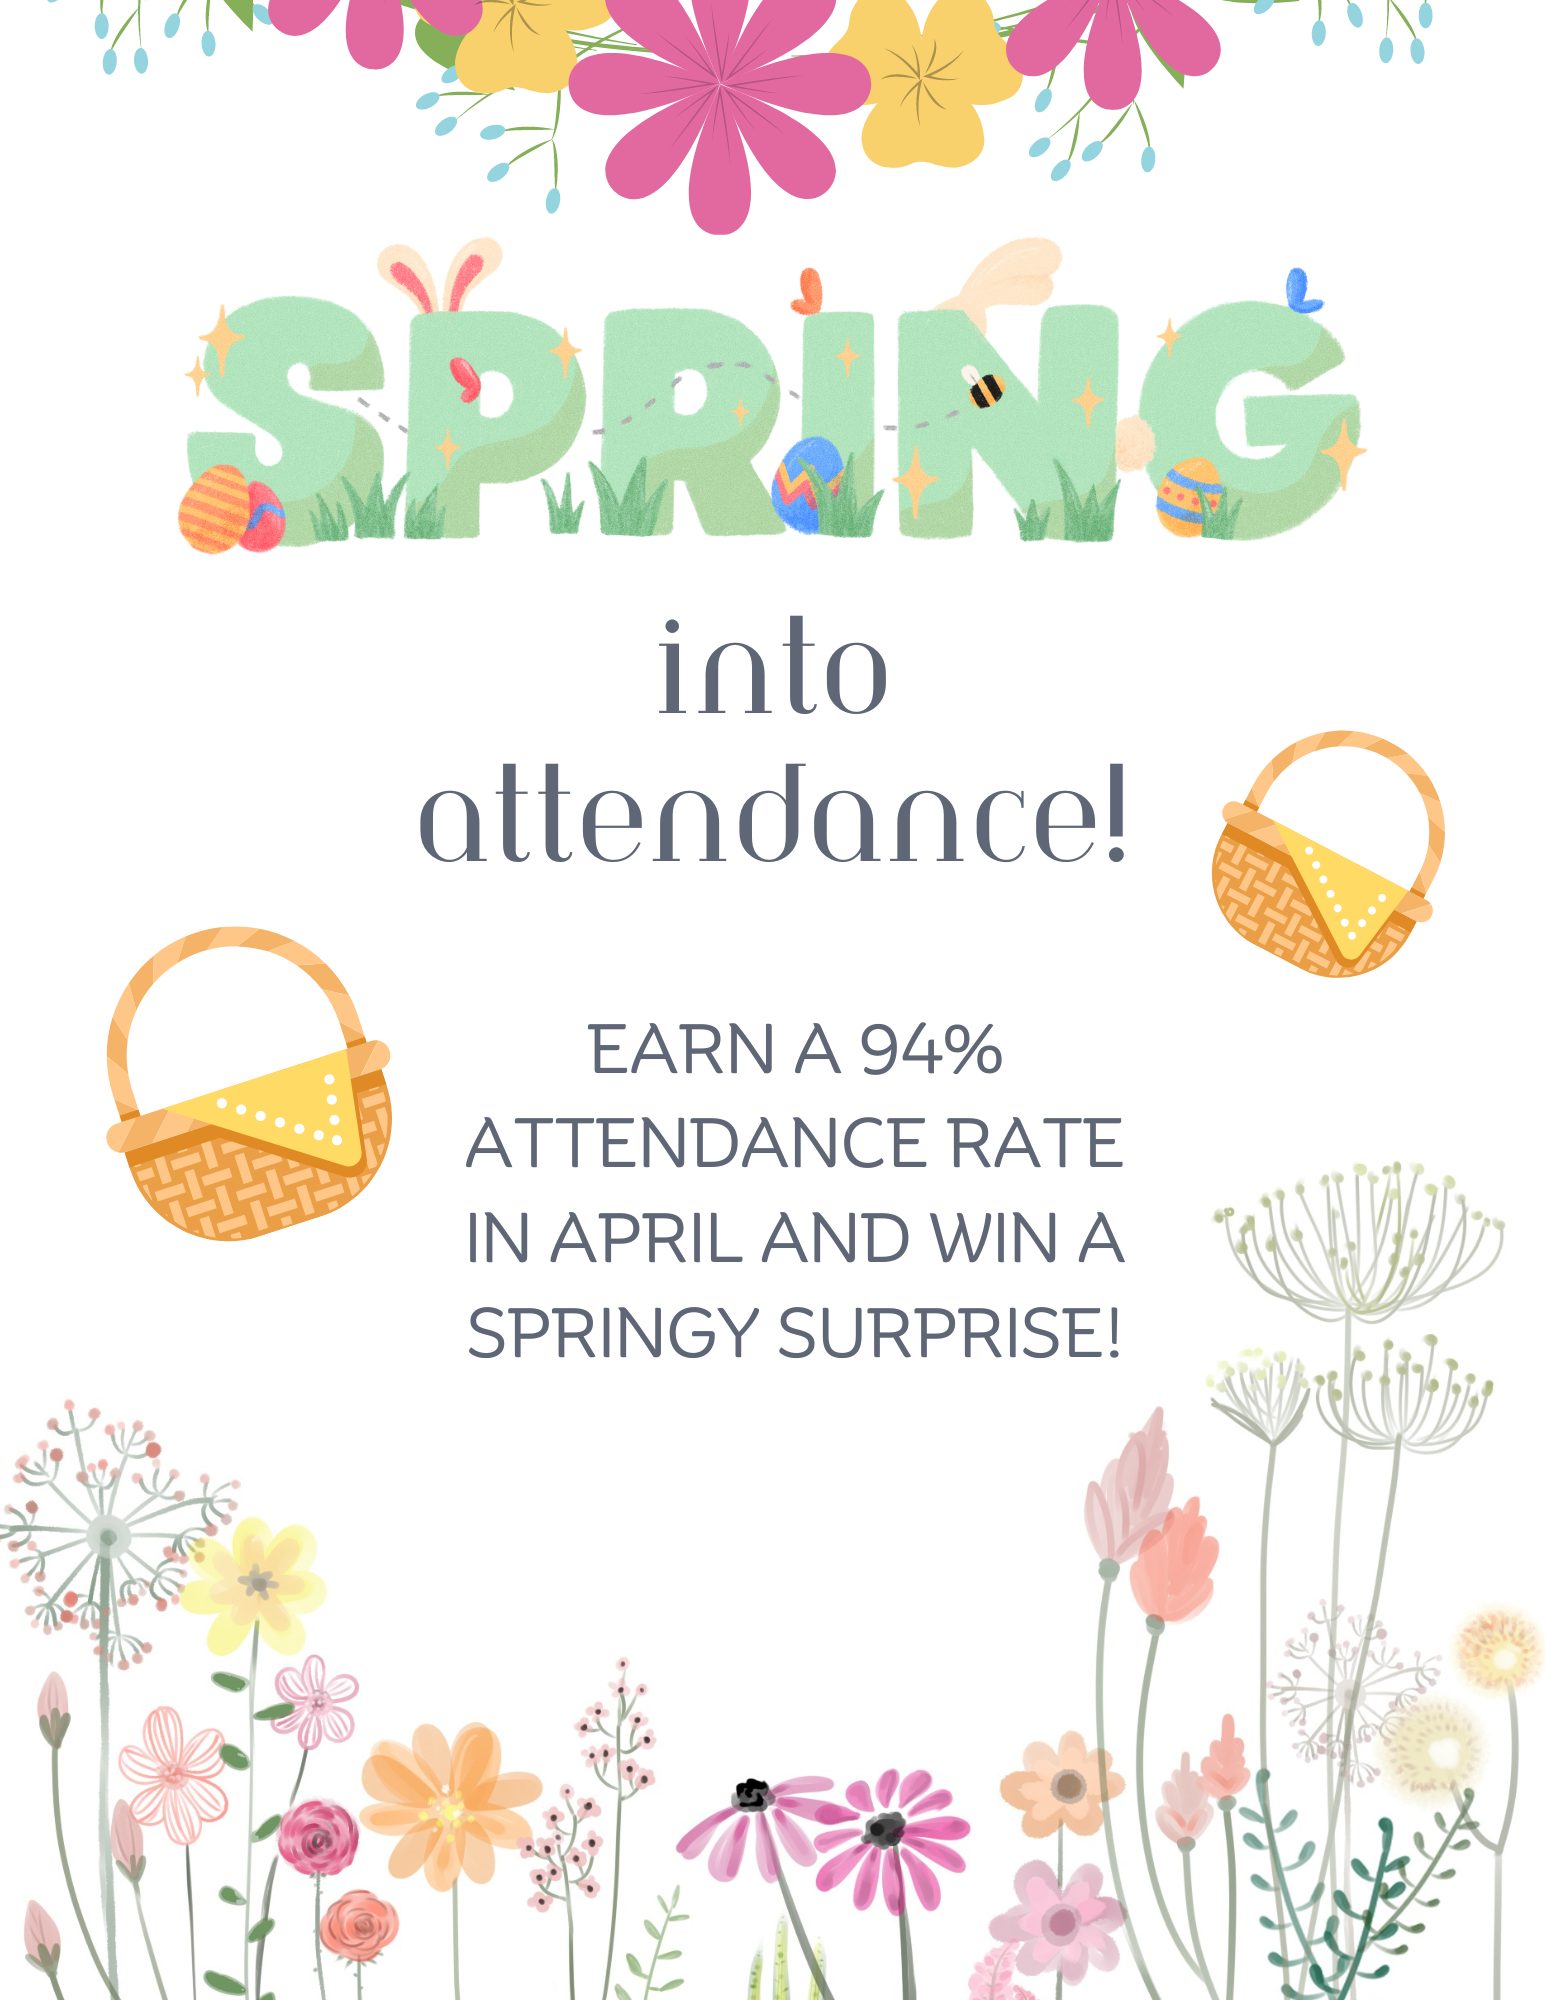 Spring into attendance! Earn a 94% attendance rate in April and win a springy surprise!